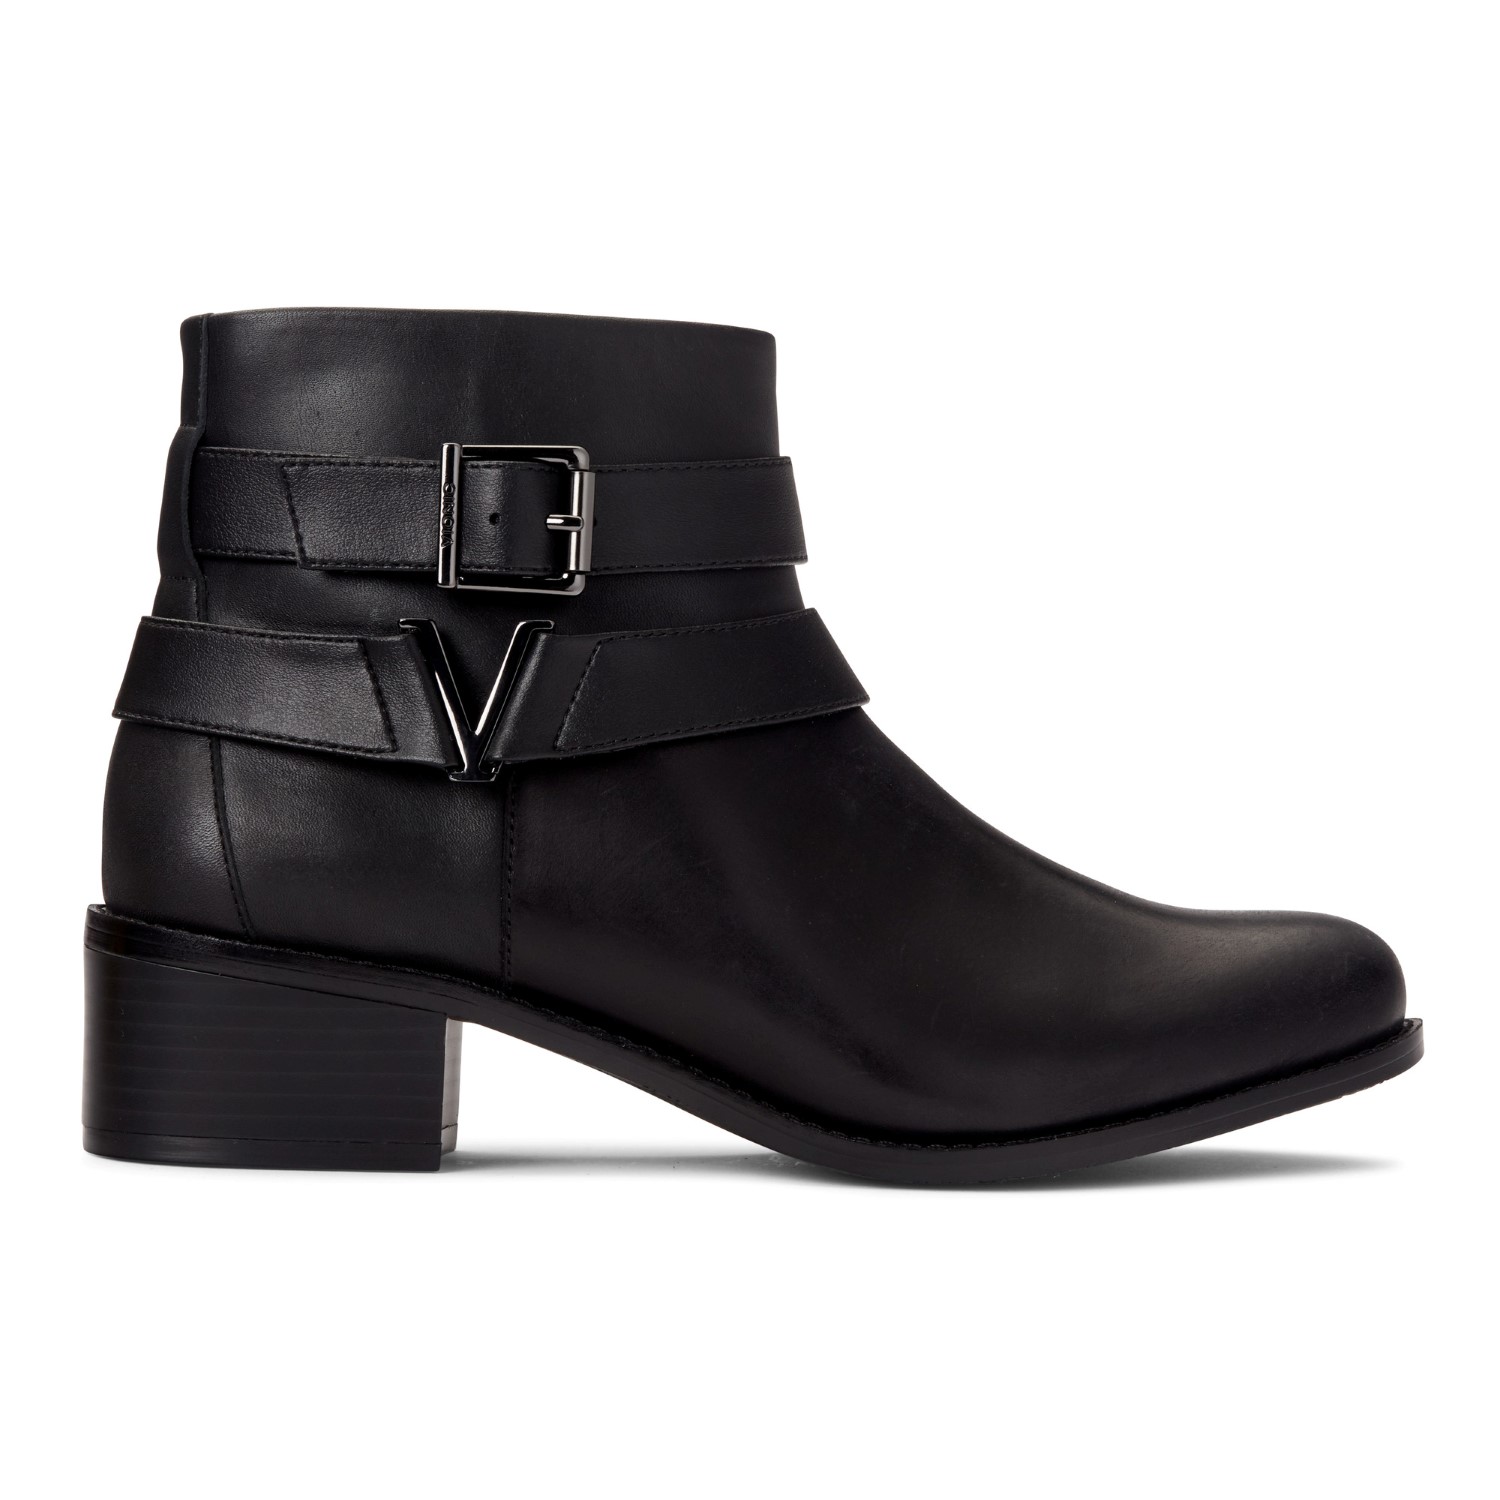 Vionic Black Suede Ankle Boots with Buckles Ama New Booties